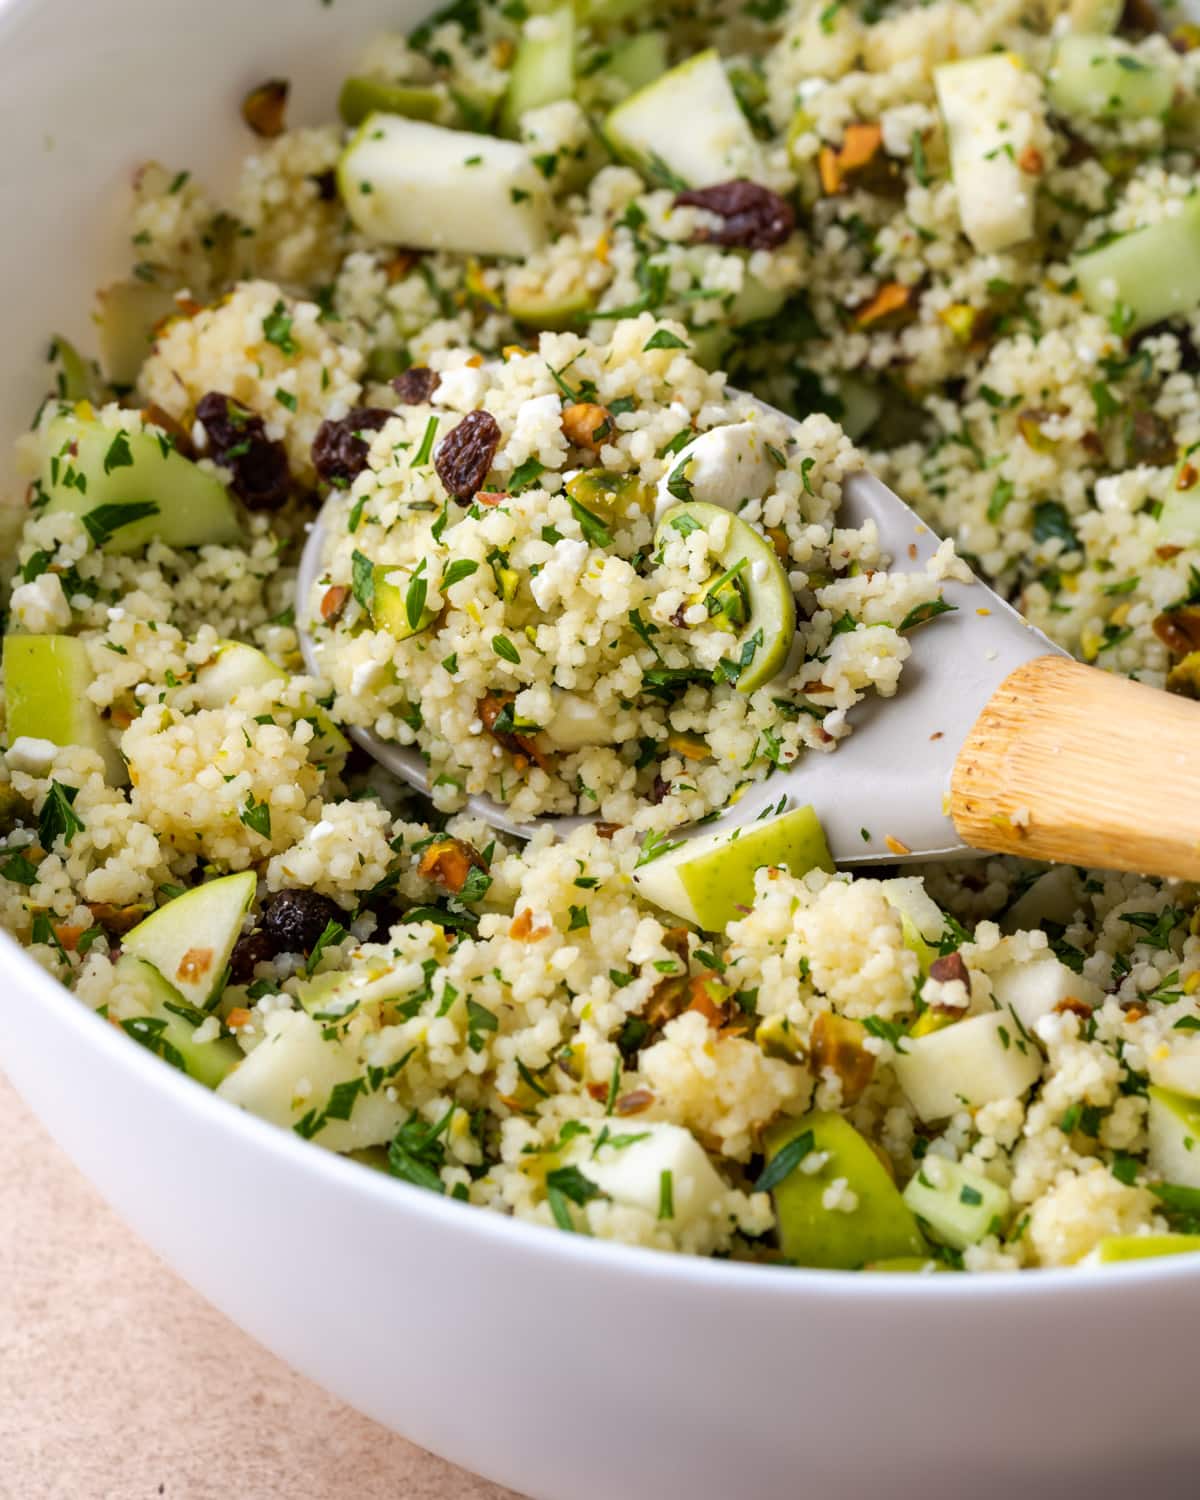 Mediterranean couscous salad in a large white bowl with a wooden spoon.